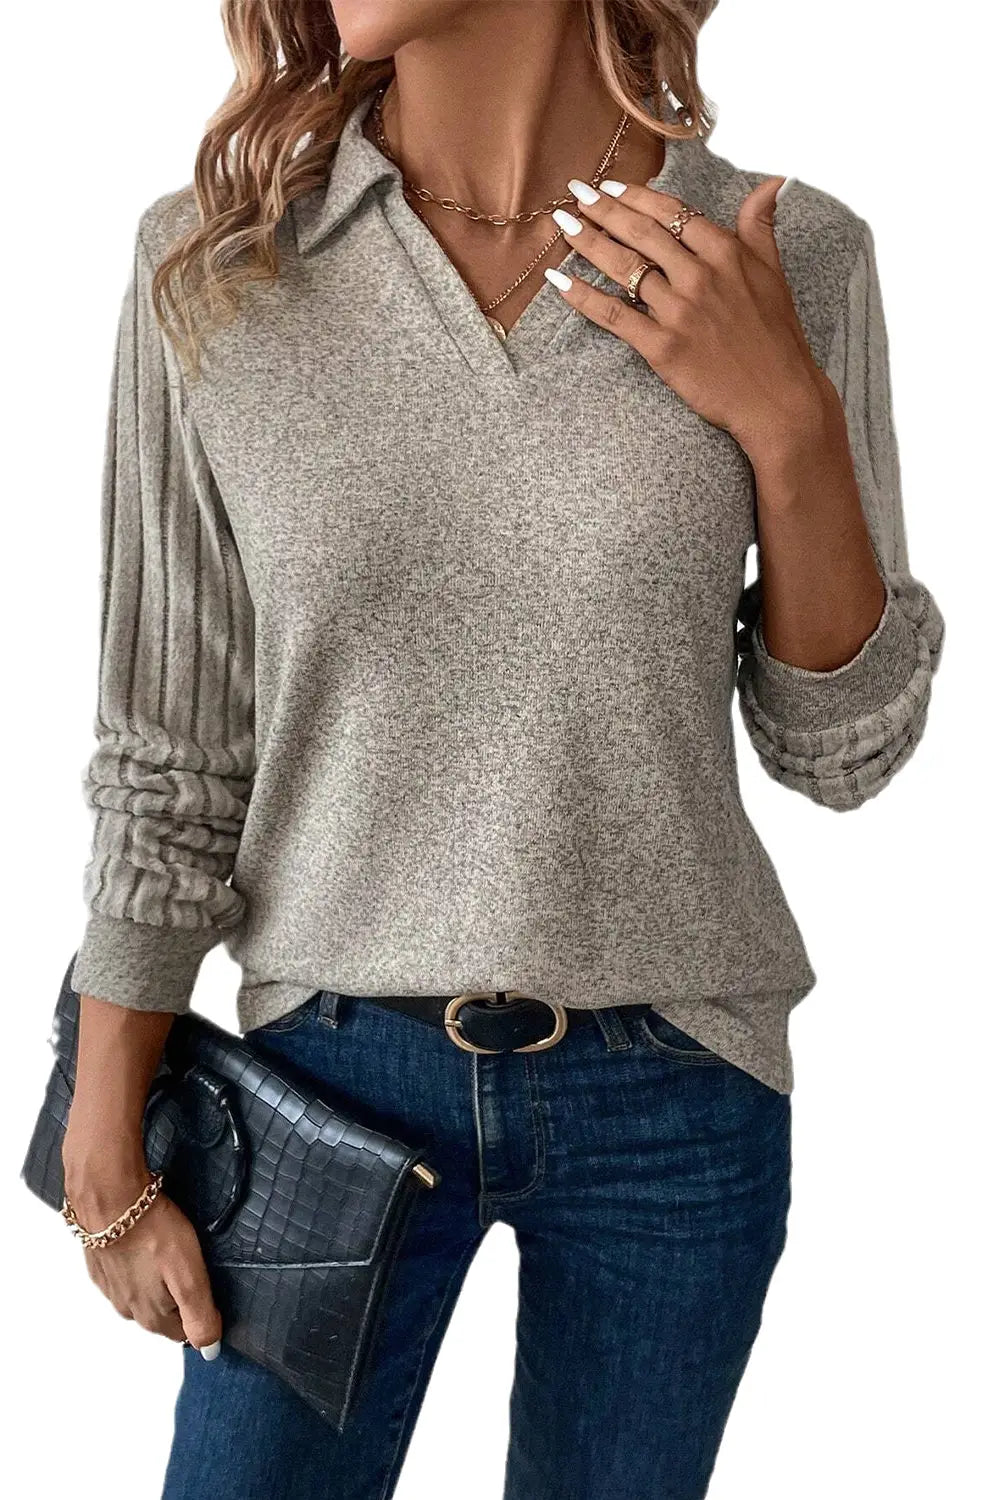 Smoke gray solid color ribbed sleeve collared v neck top - long tops